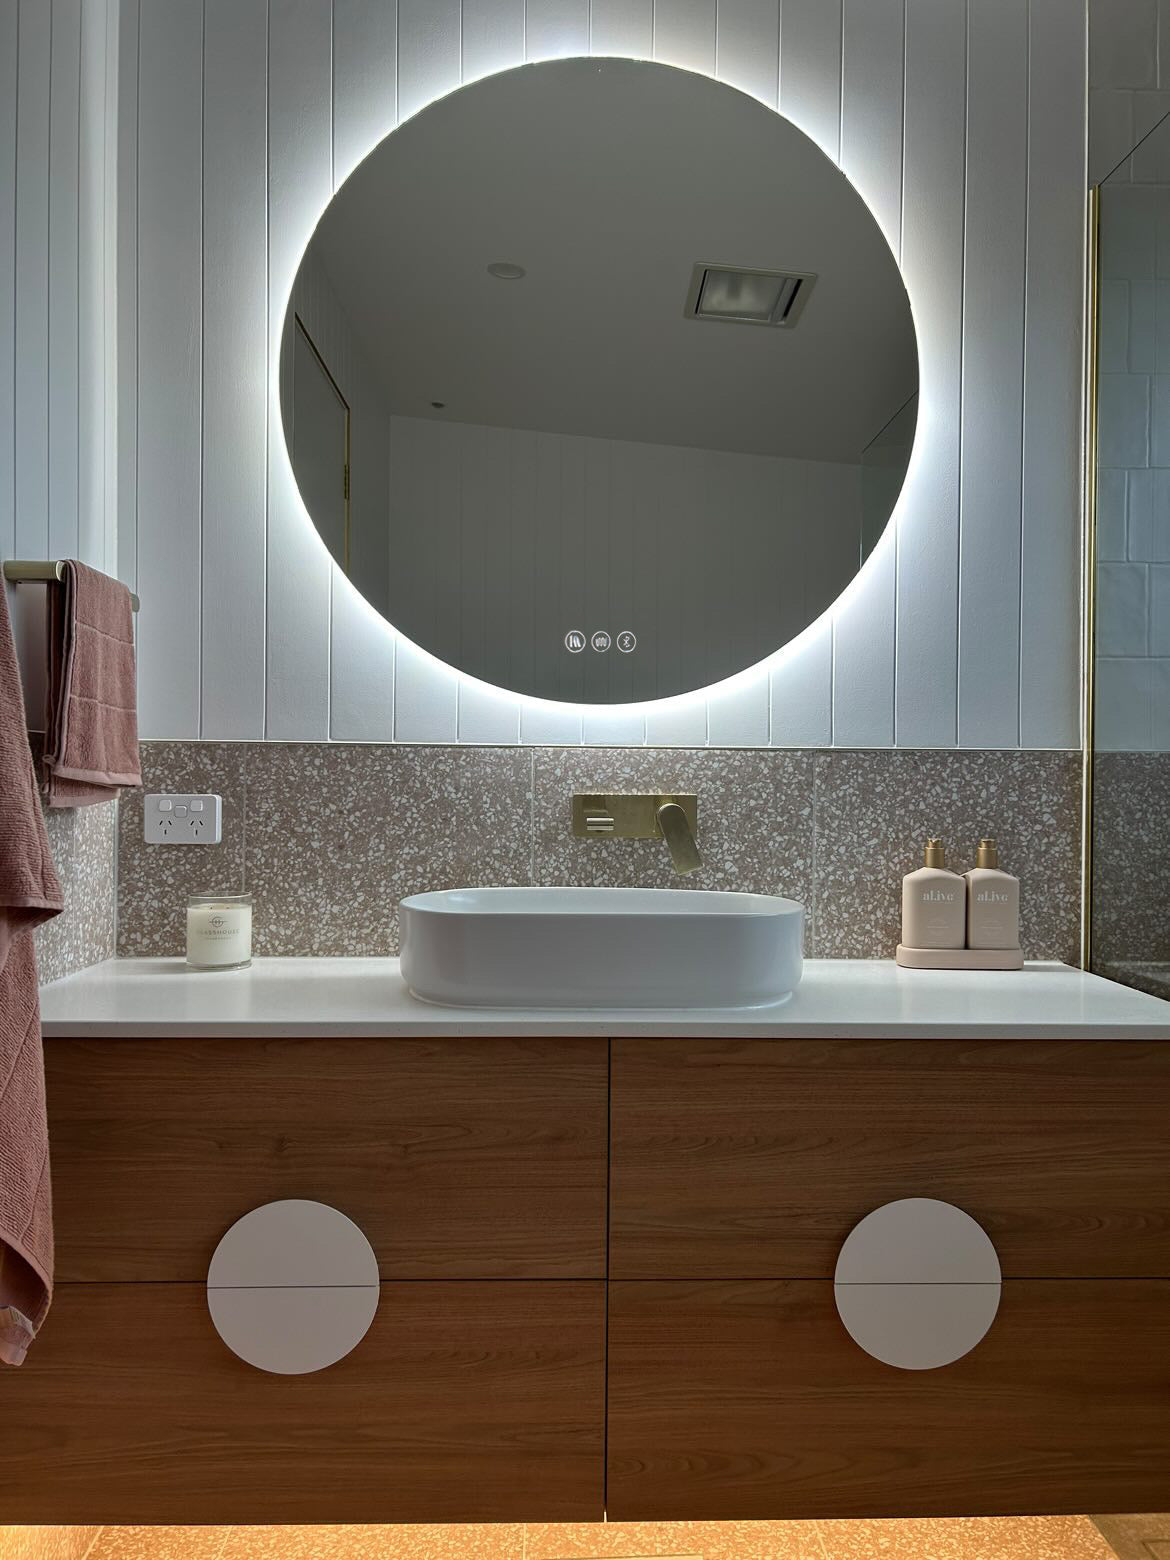 Versatile Circle Backlit LED Mirror in white, light brown, and gold themed bathroom.